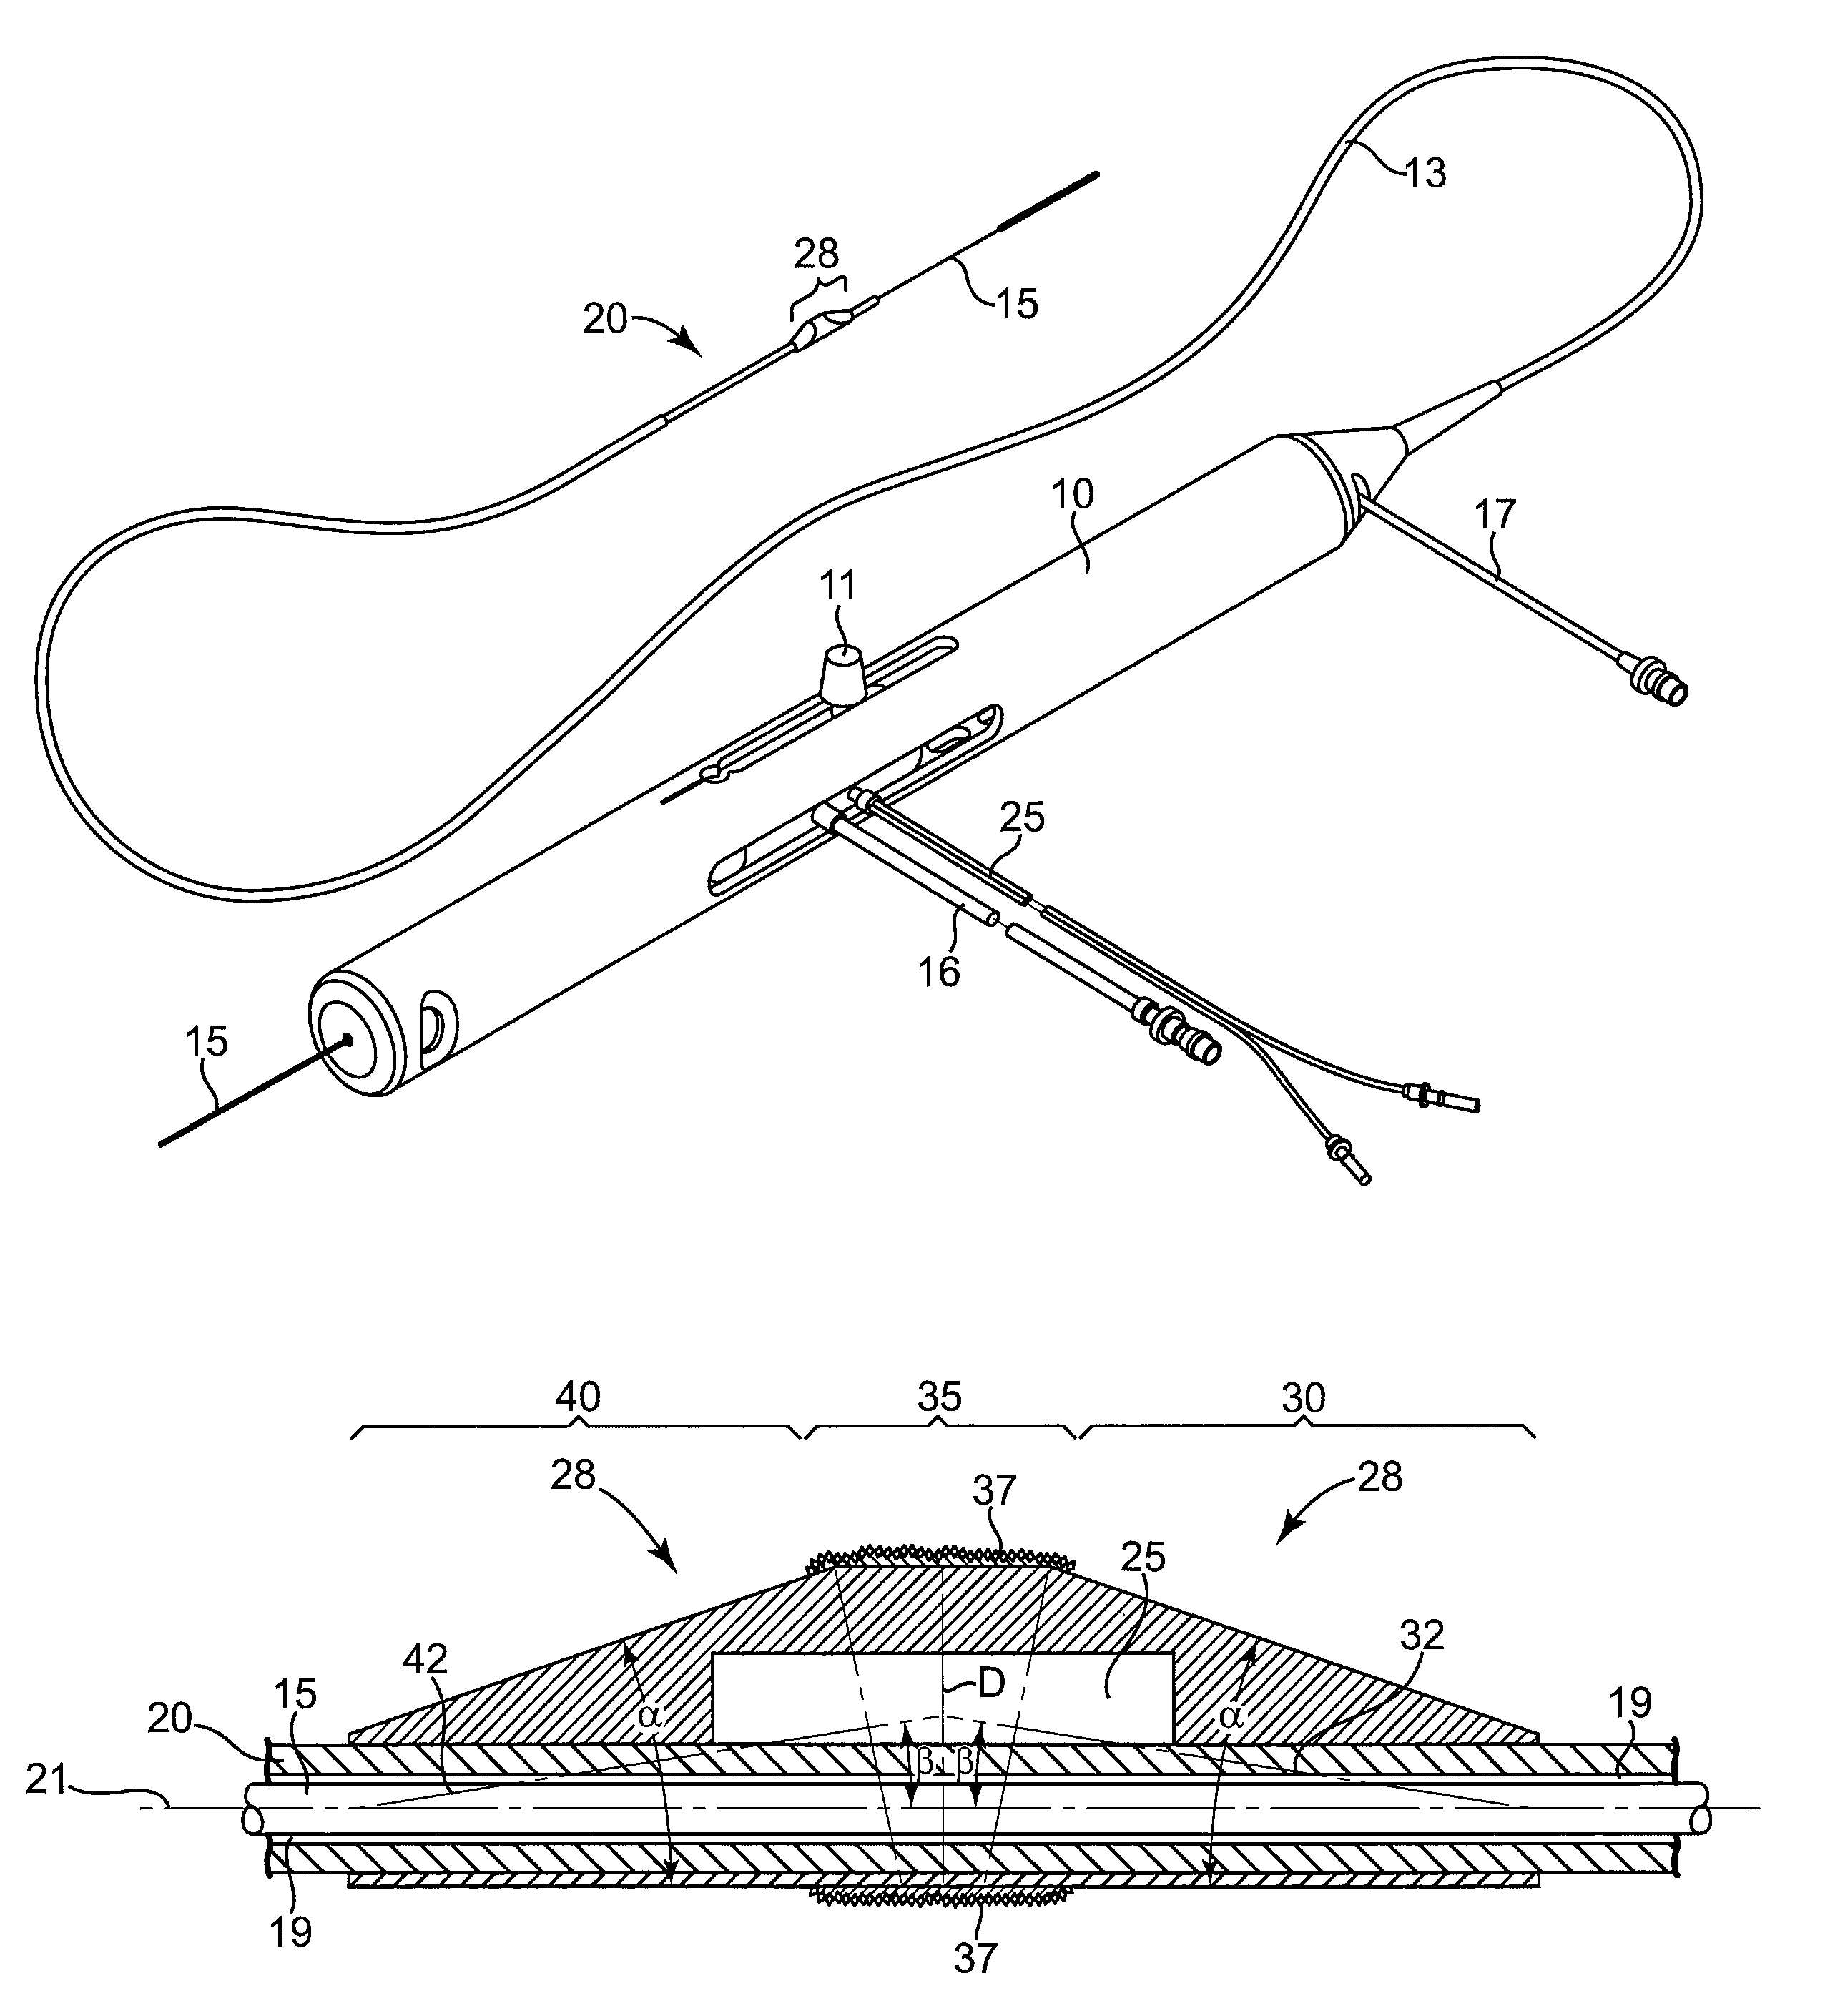 Eccentric abrading head for high-speed rotational atherectomy devices